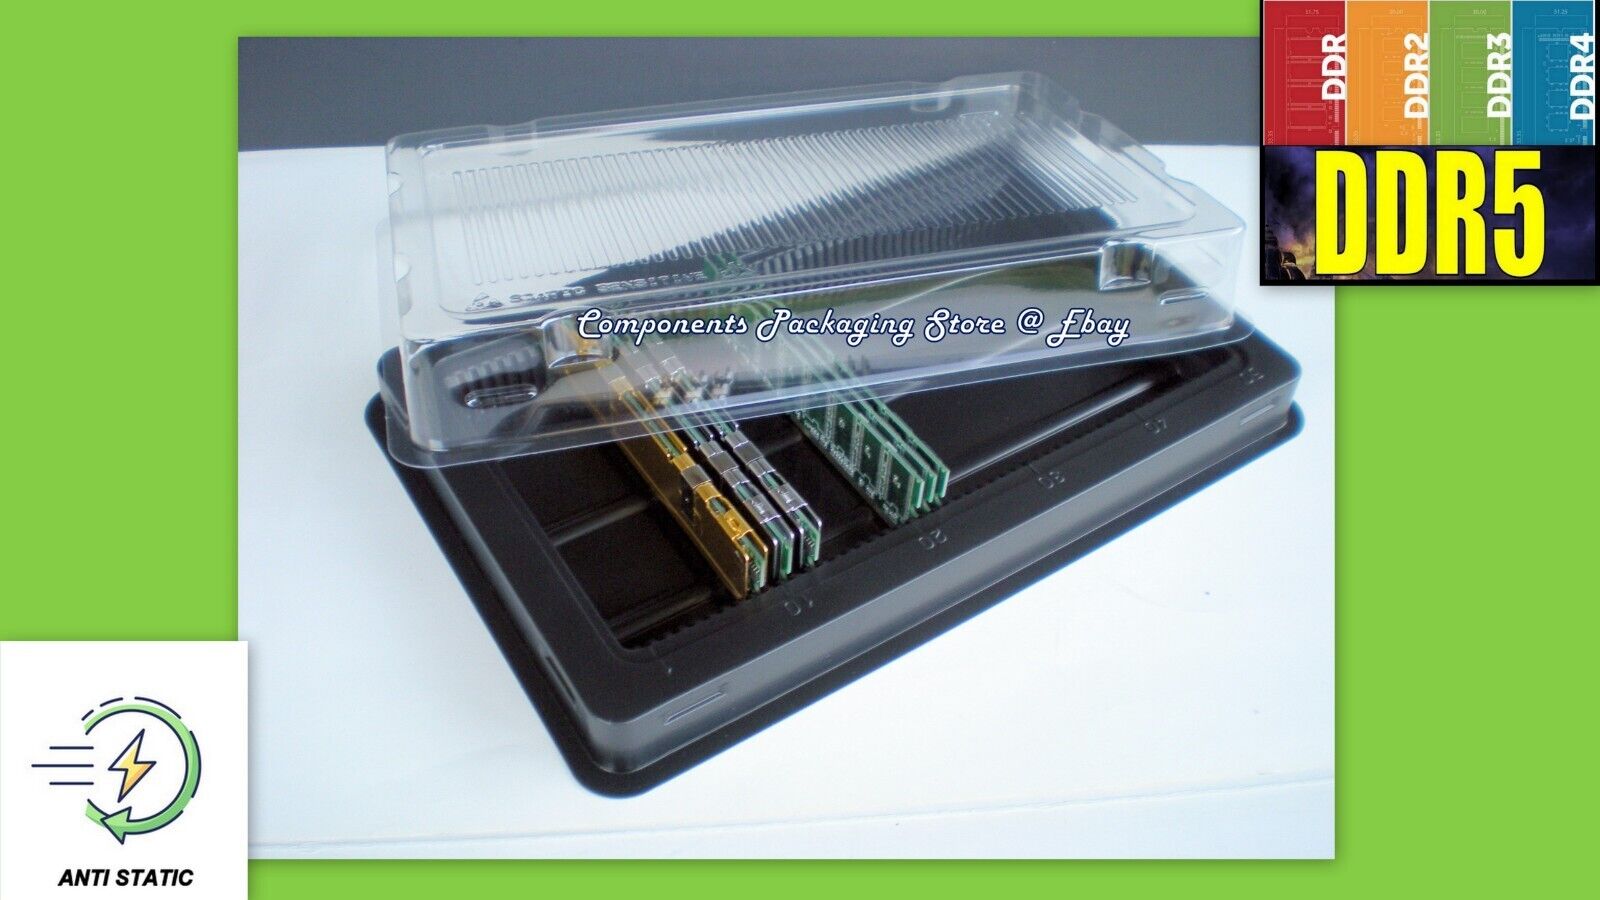 2 RAM PC Memory Bulk Packaging Container Box - 50 slots DIMM Trays New Fits 100